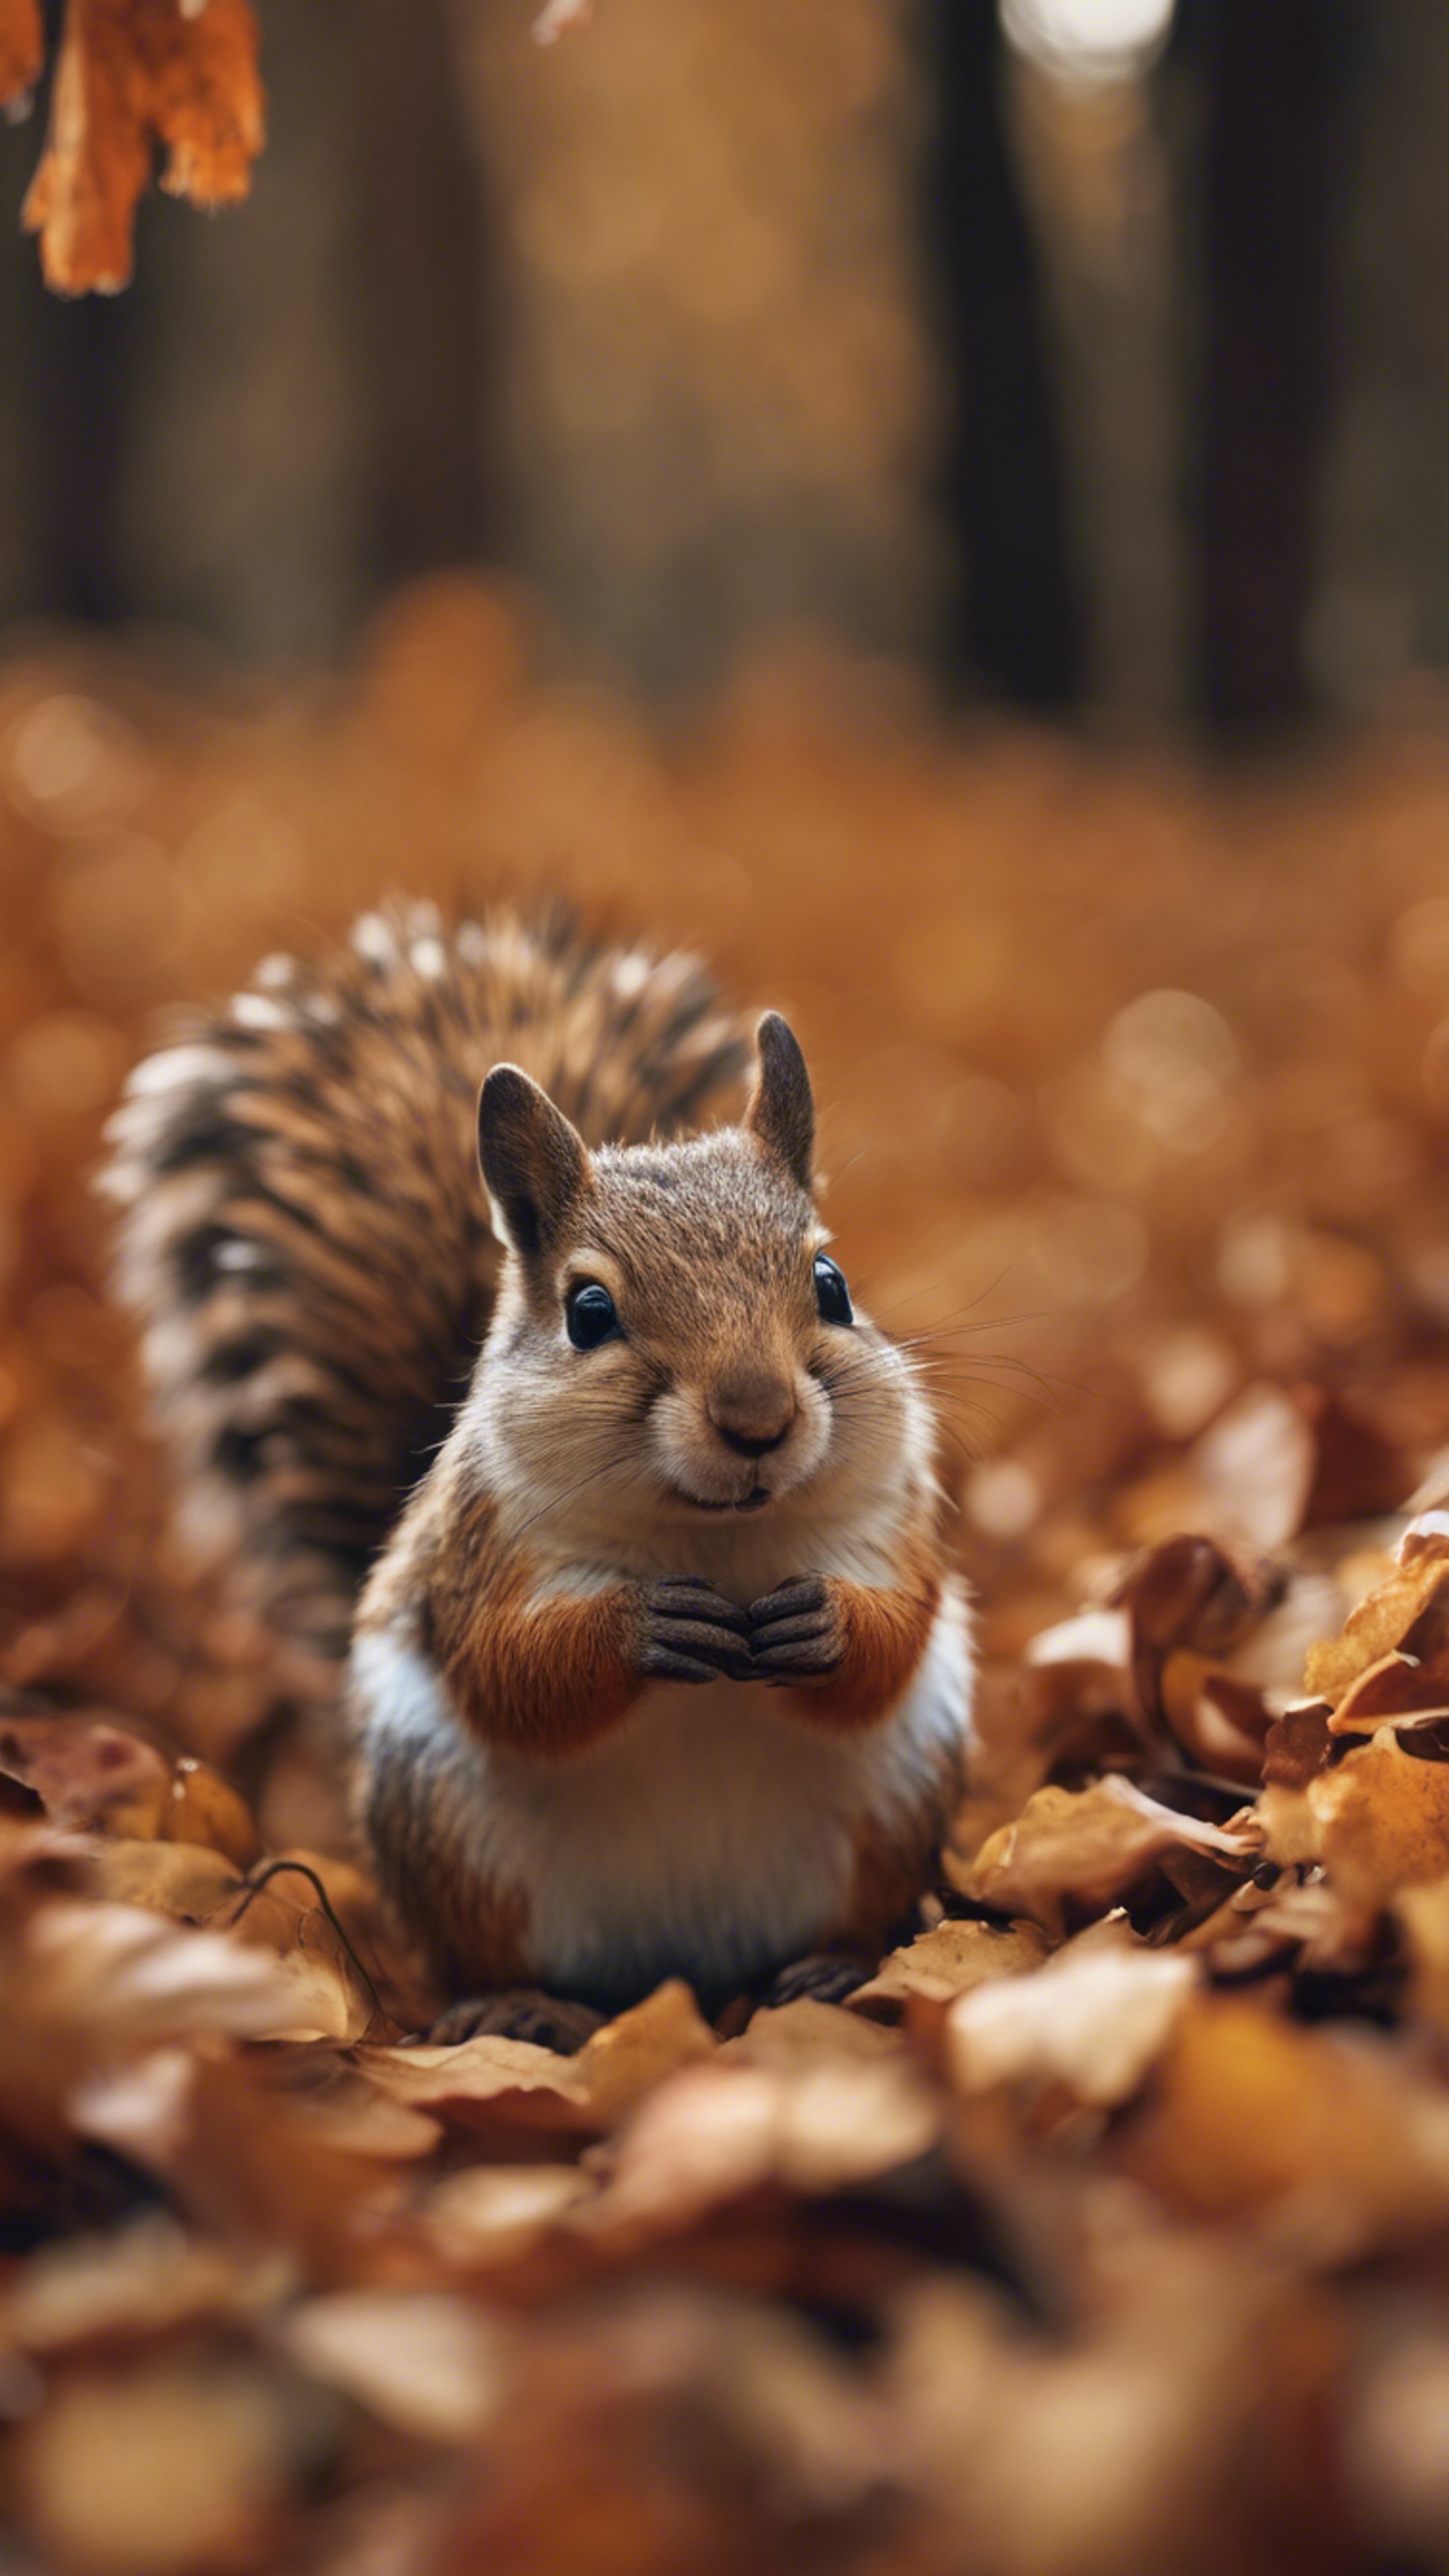 Charming woodland creatures collecting nuts amidst rustling autumn leaves, prepping for winter. Wallpaper[dc4b1b8992e04ad78e11]